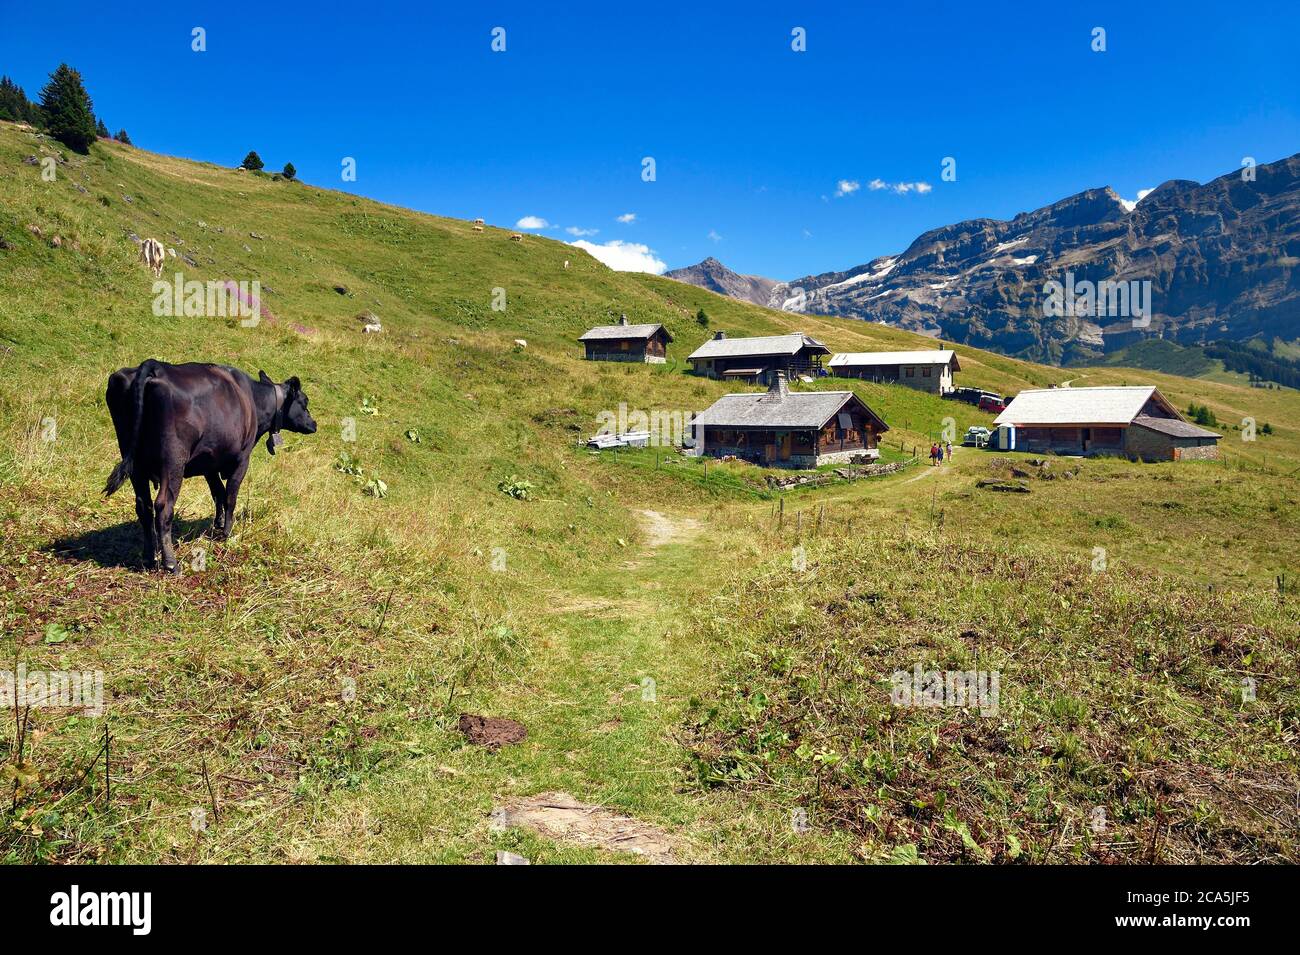 Switzerland, Canton of Vaud, Villars-sur-Ollon, hike from the Bretaye pass to the Croix pass passing through the hamlet of Ensex, the hamlet of Ensex Stock Photo